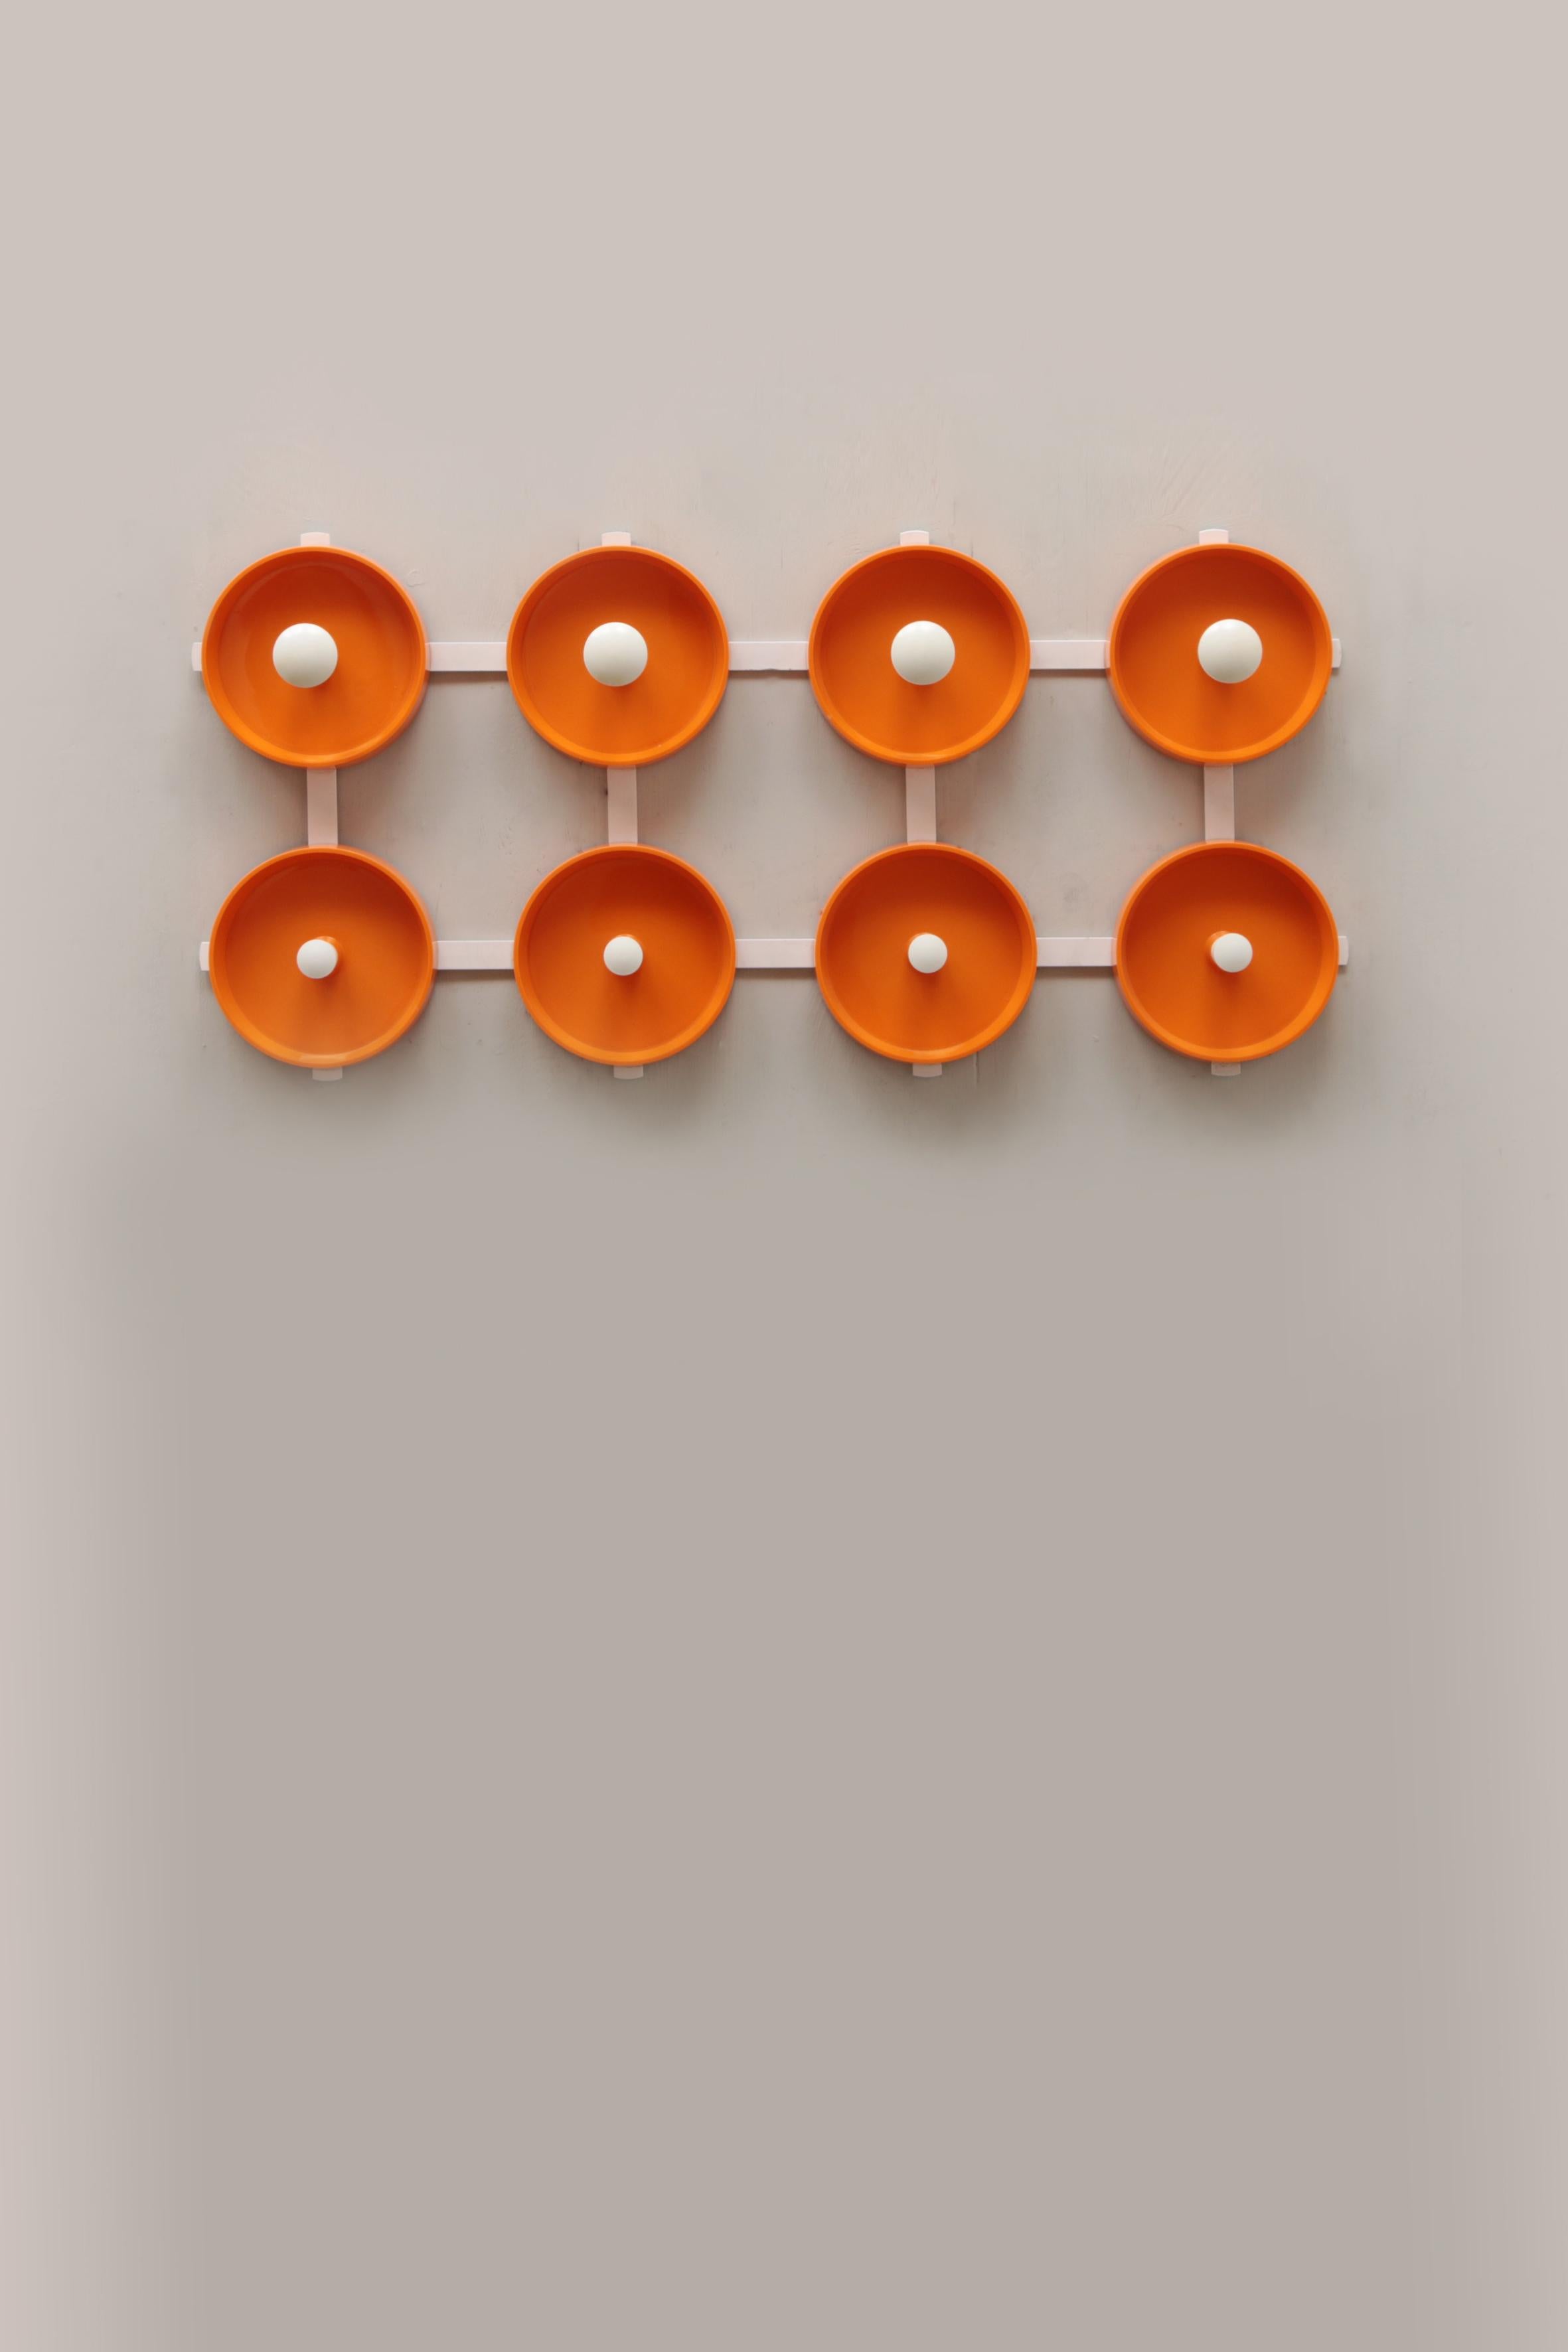 This is a very nice separate wall coat rack with white hooks.

The back is made of white metal with beautiful plastic orange round scales with a hook for your coat in the middle. The coat rack has 8 hooks to hang your coat on.

Sustainable: